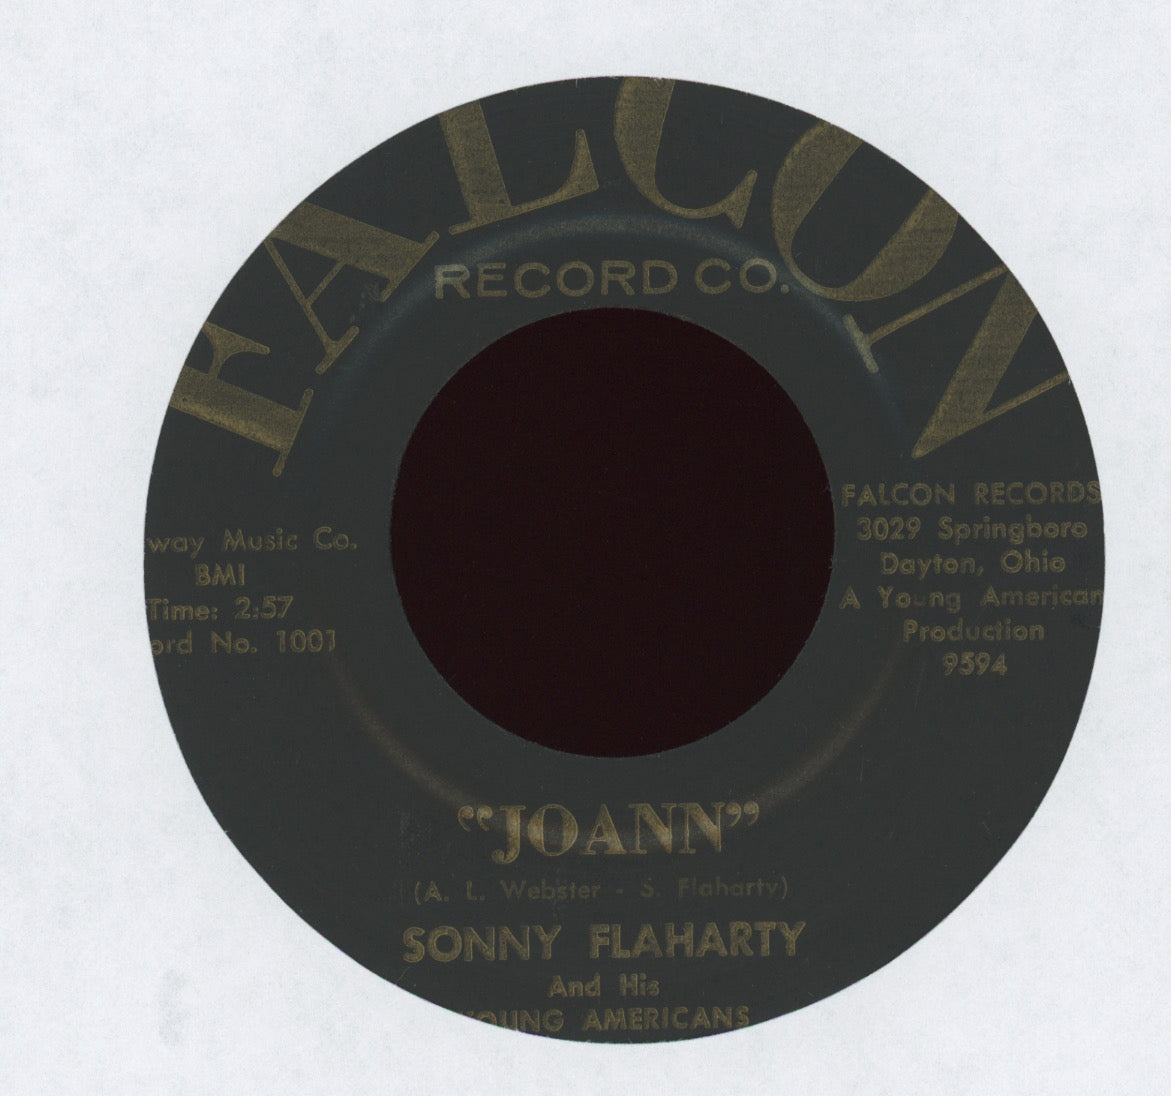 Sonny Flaharty And His Young Americans - Hurricane on Falcon R&B Popcorn 45